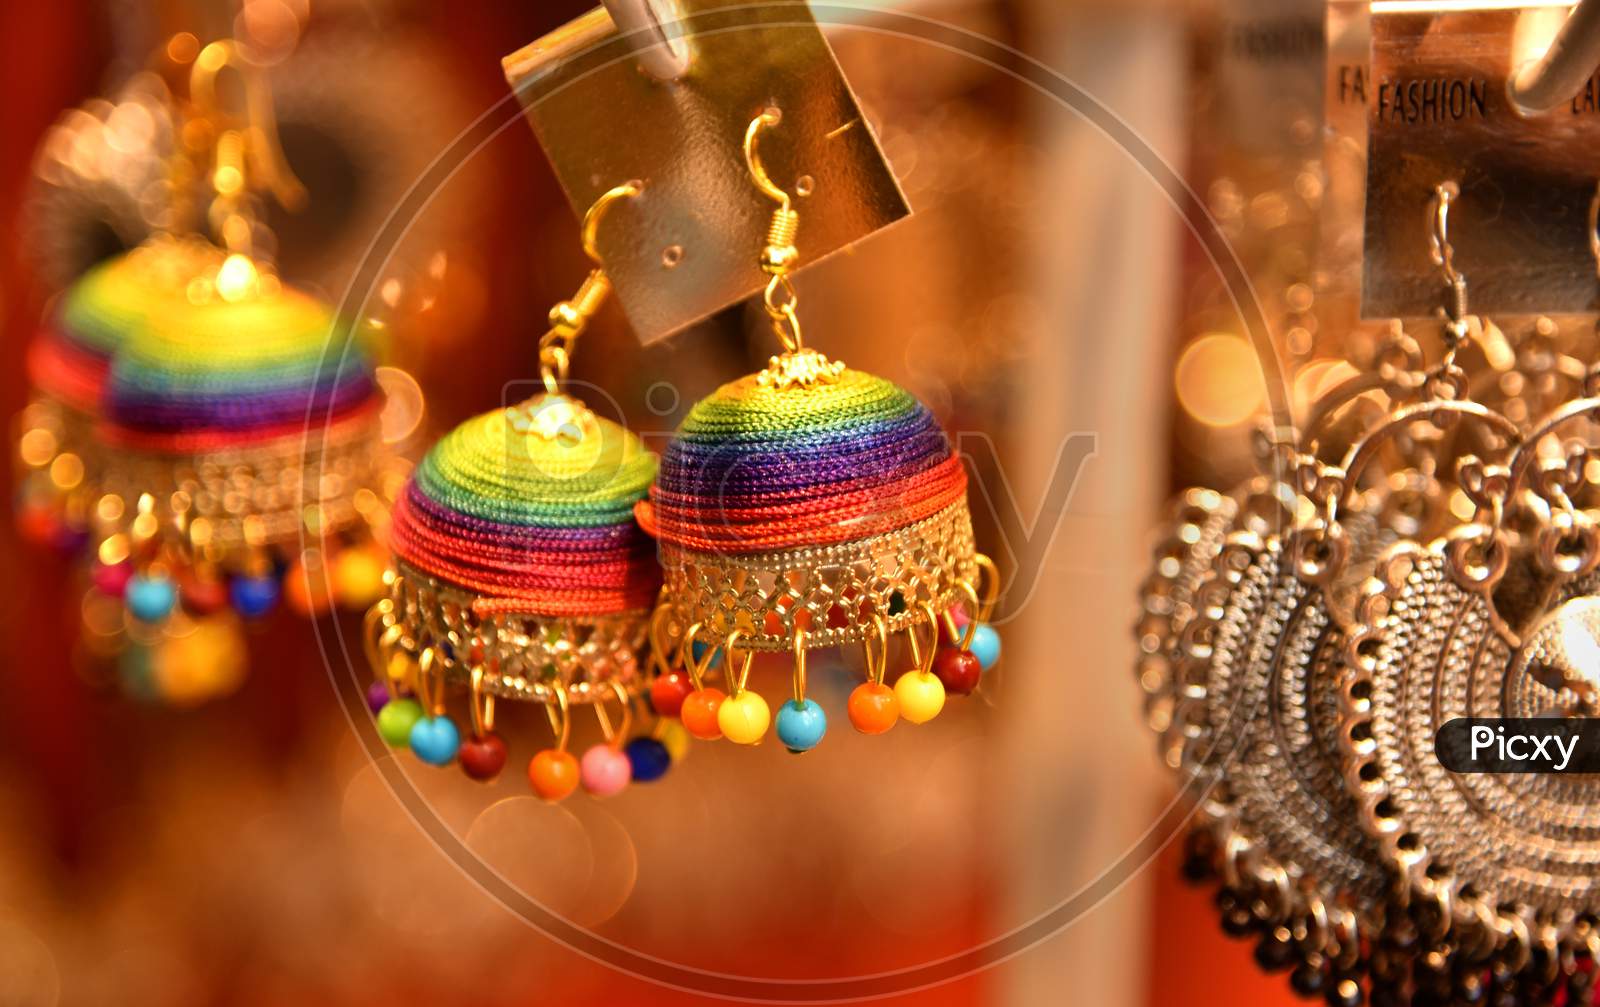 Ornament With Ear Rings Selling At a Vendor Stall